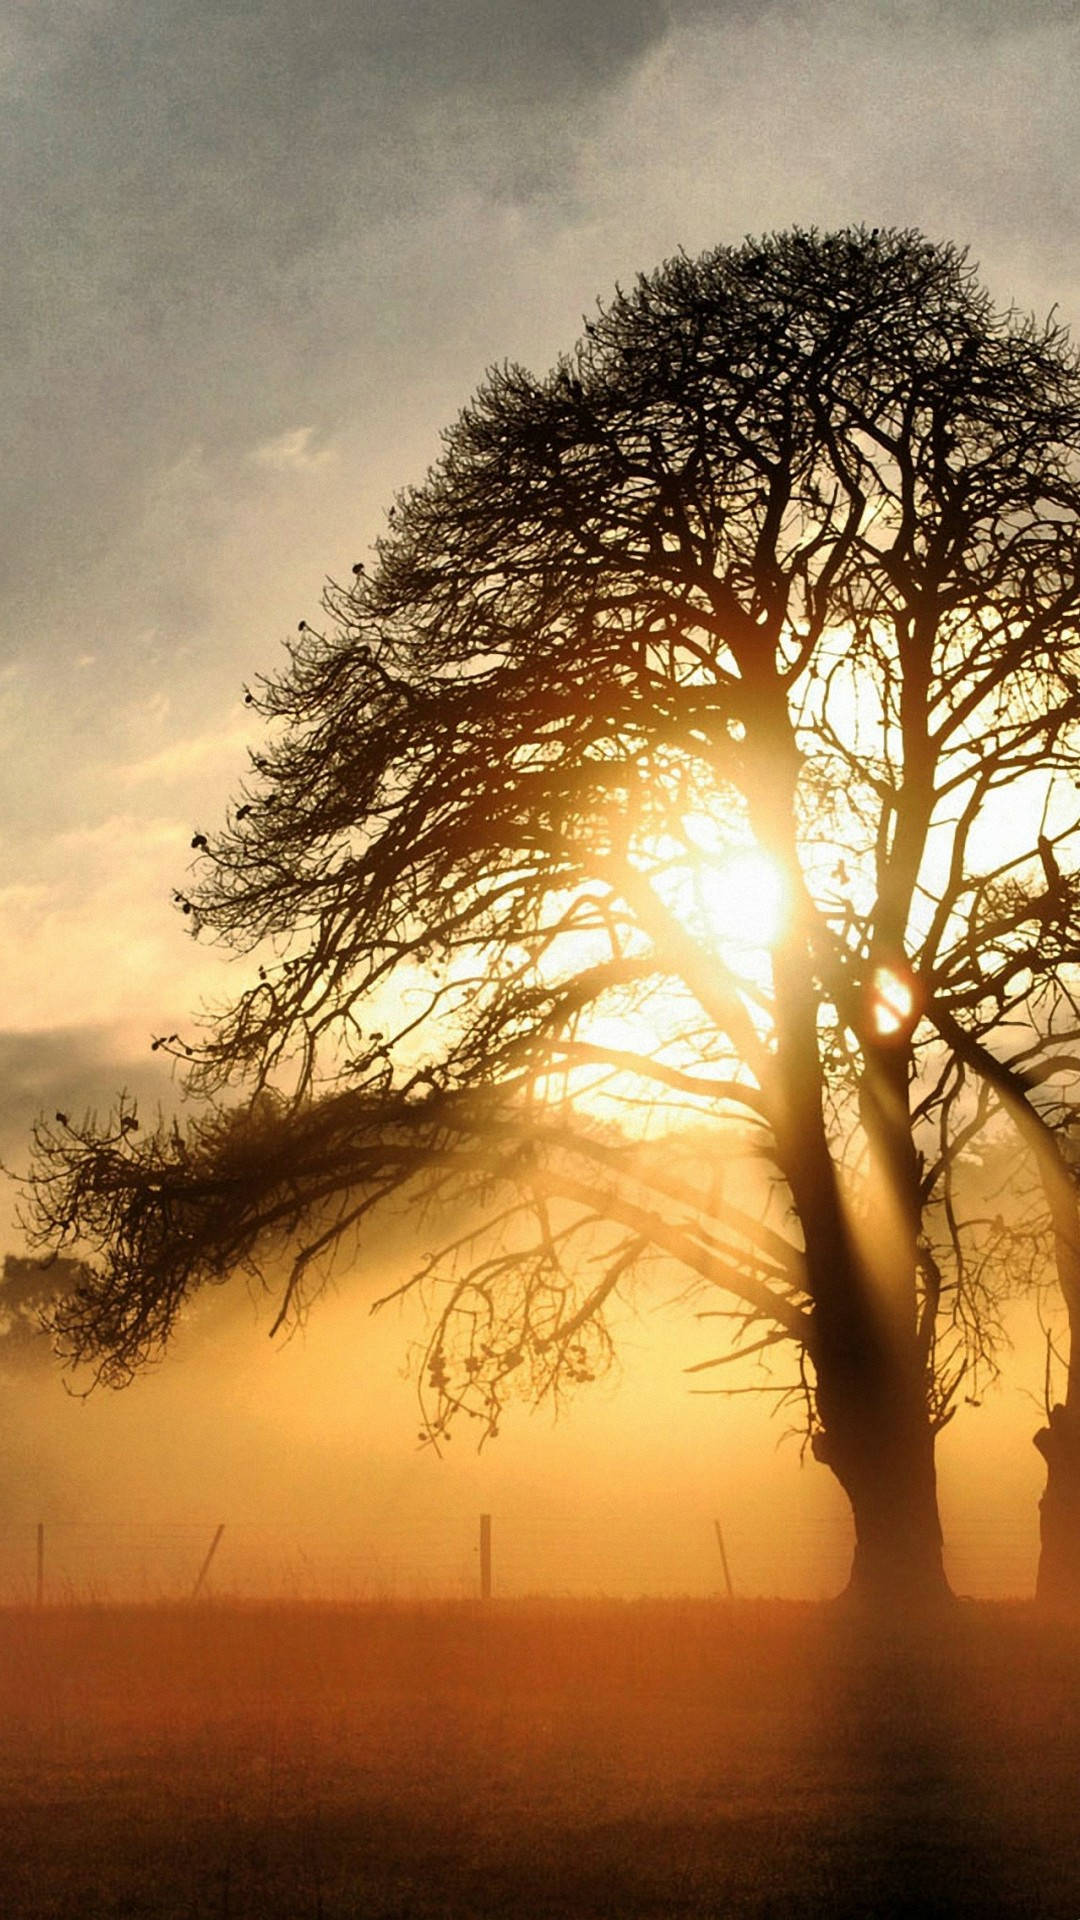 Best Tree And Sunlight View Wallpaper